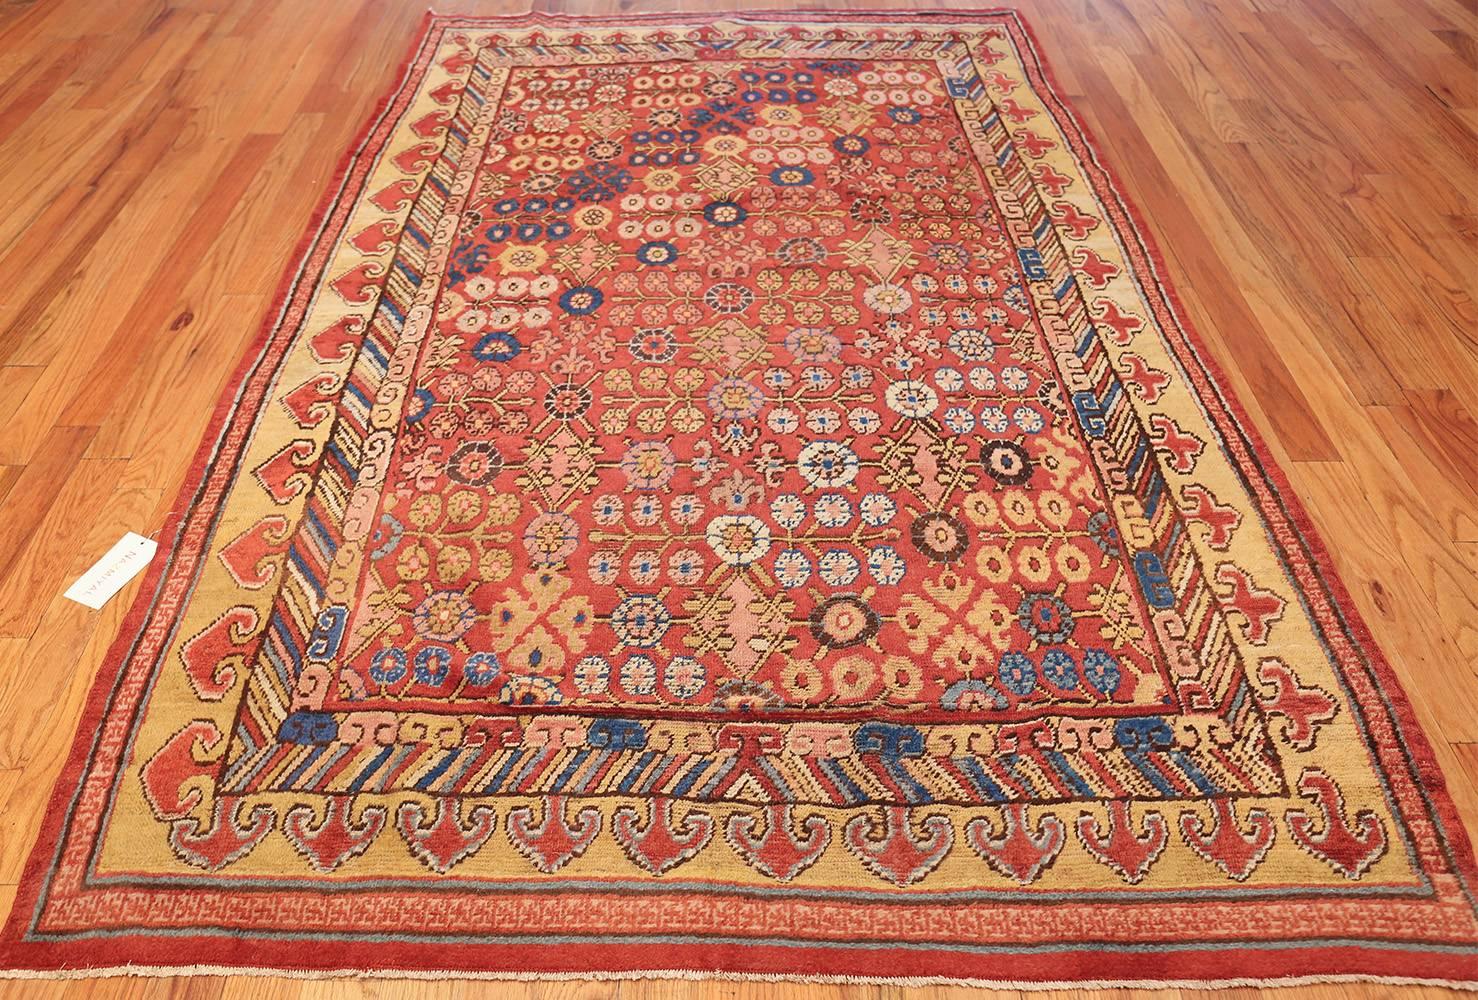 Nazmiyal Collection Antique 18th Century Khotan Rug. 5 ft 6 in x 8 ft 9 in  1